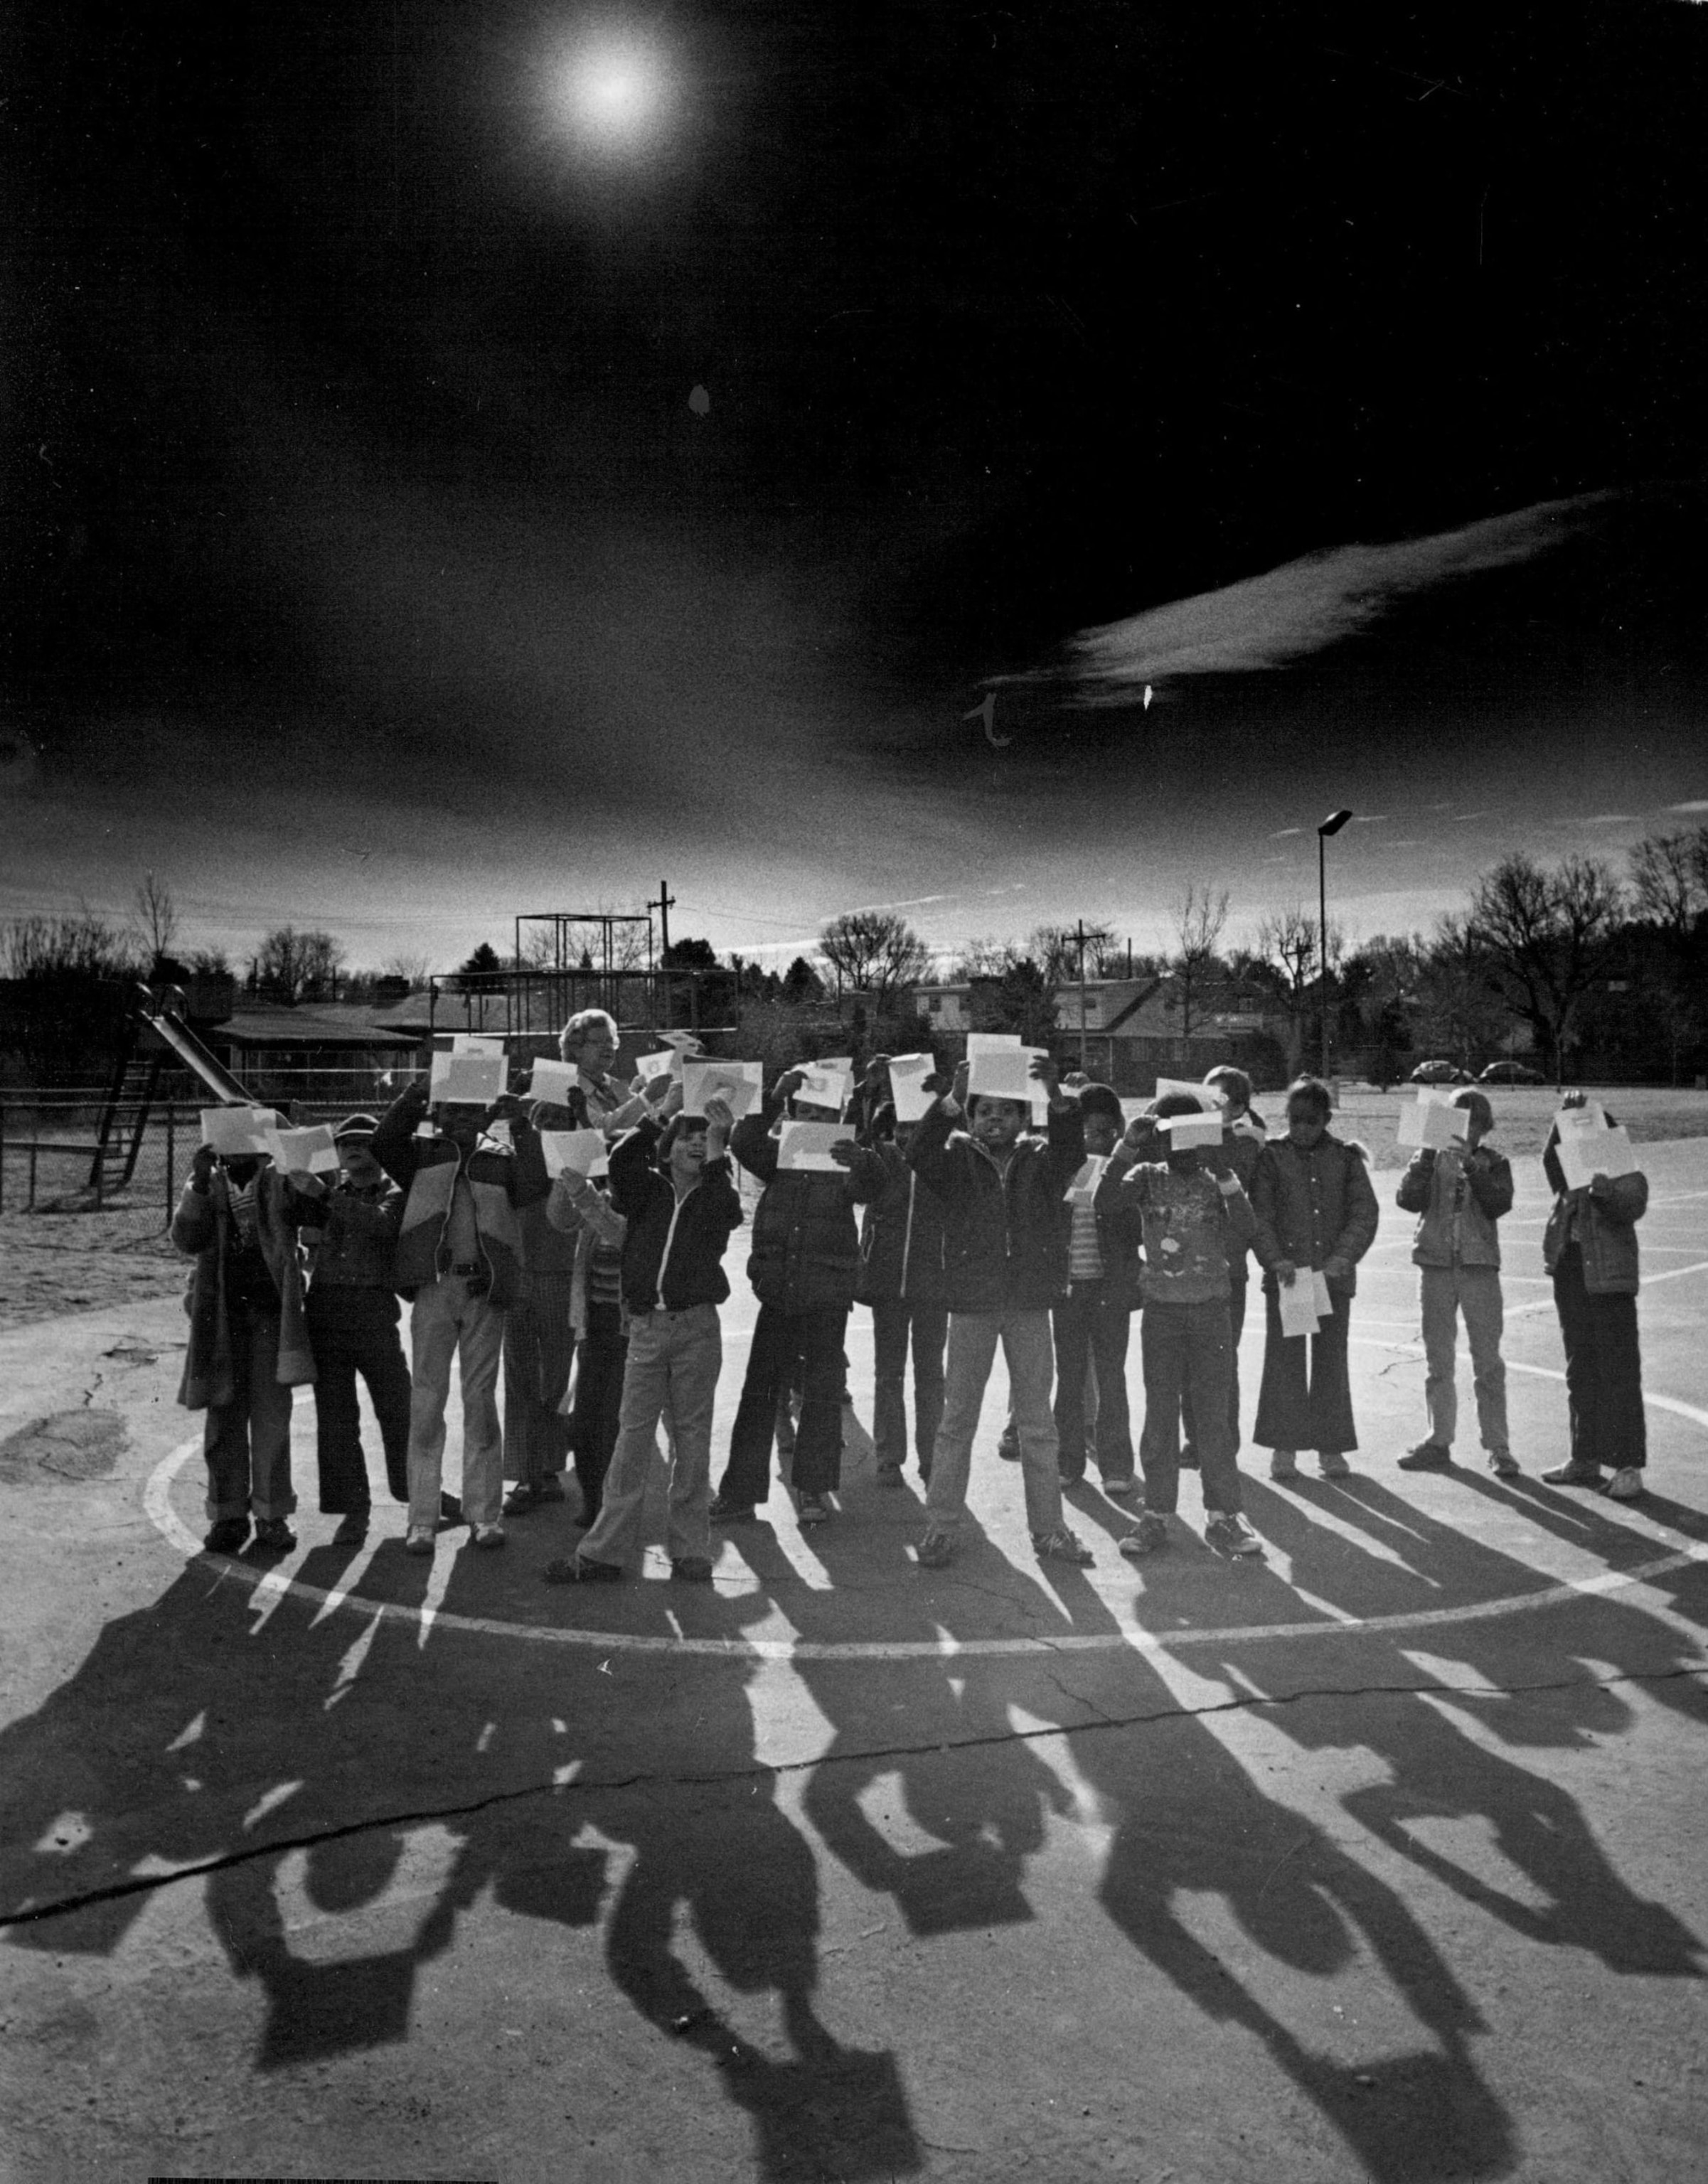 PHOTO: Pupils at Stephen Knight School view the solar eclipse in Dencer, CO, Feb. 26, 1979.